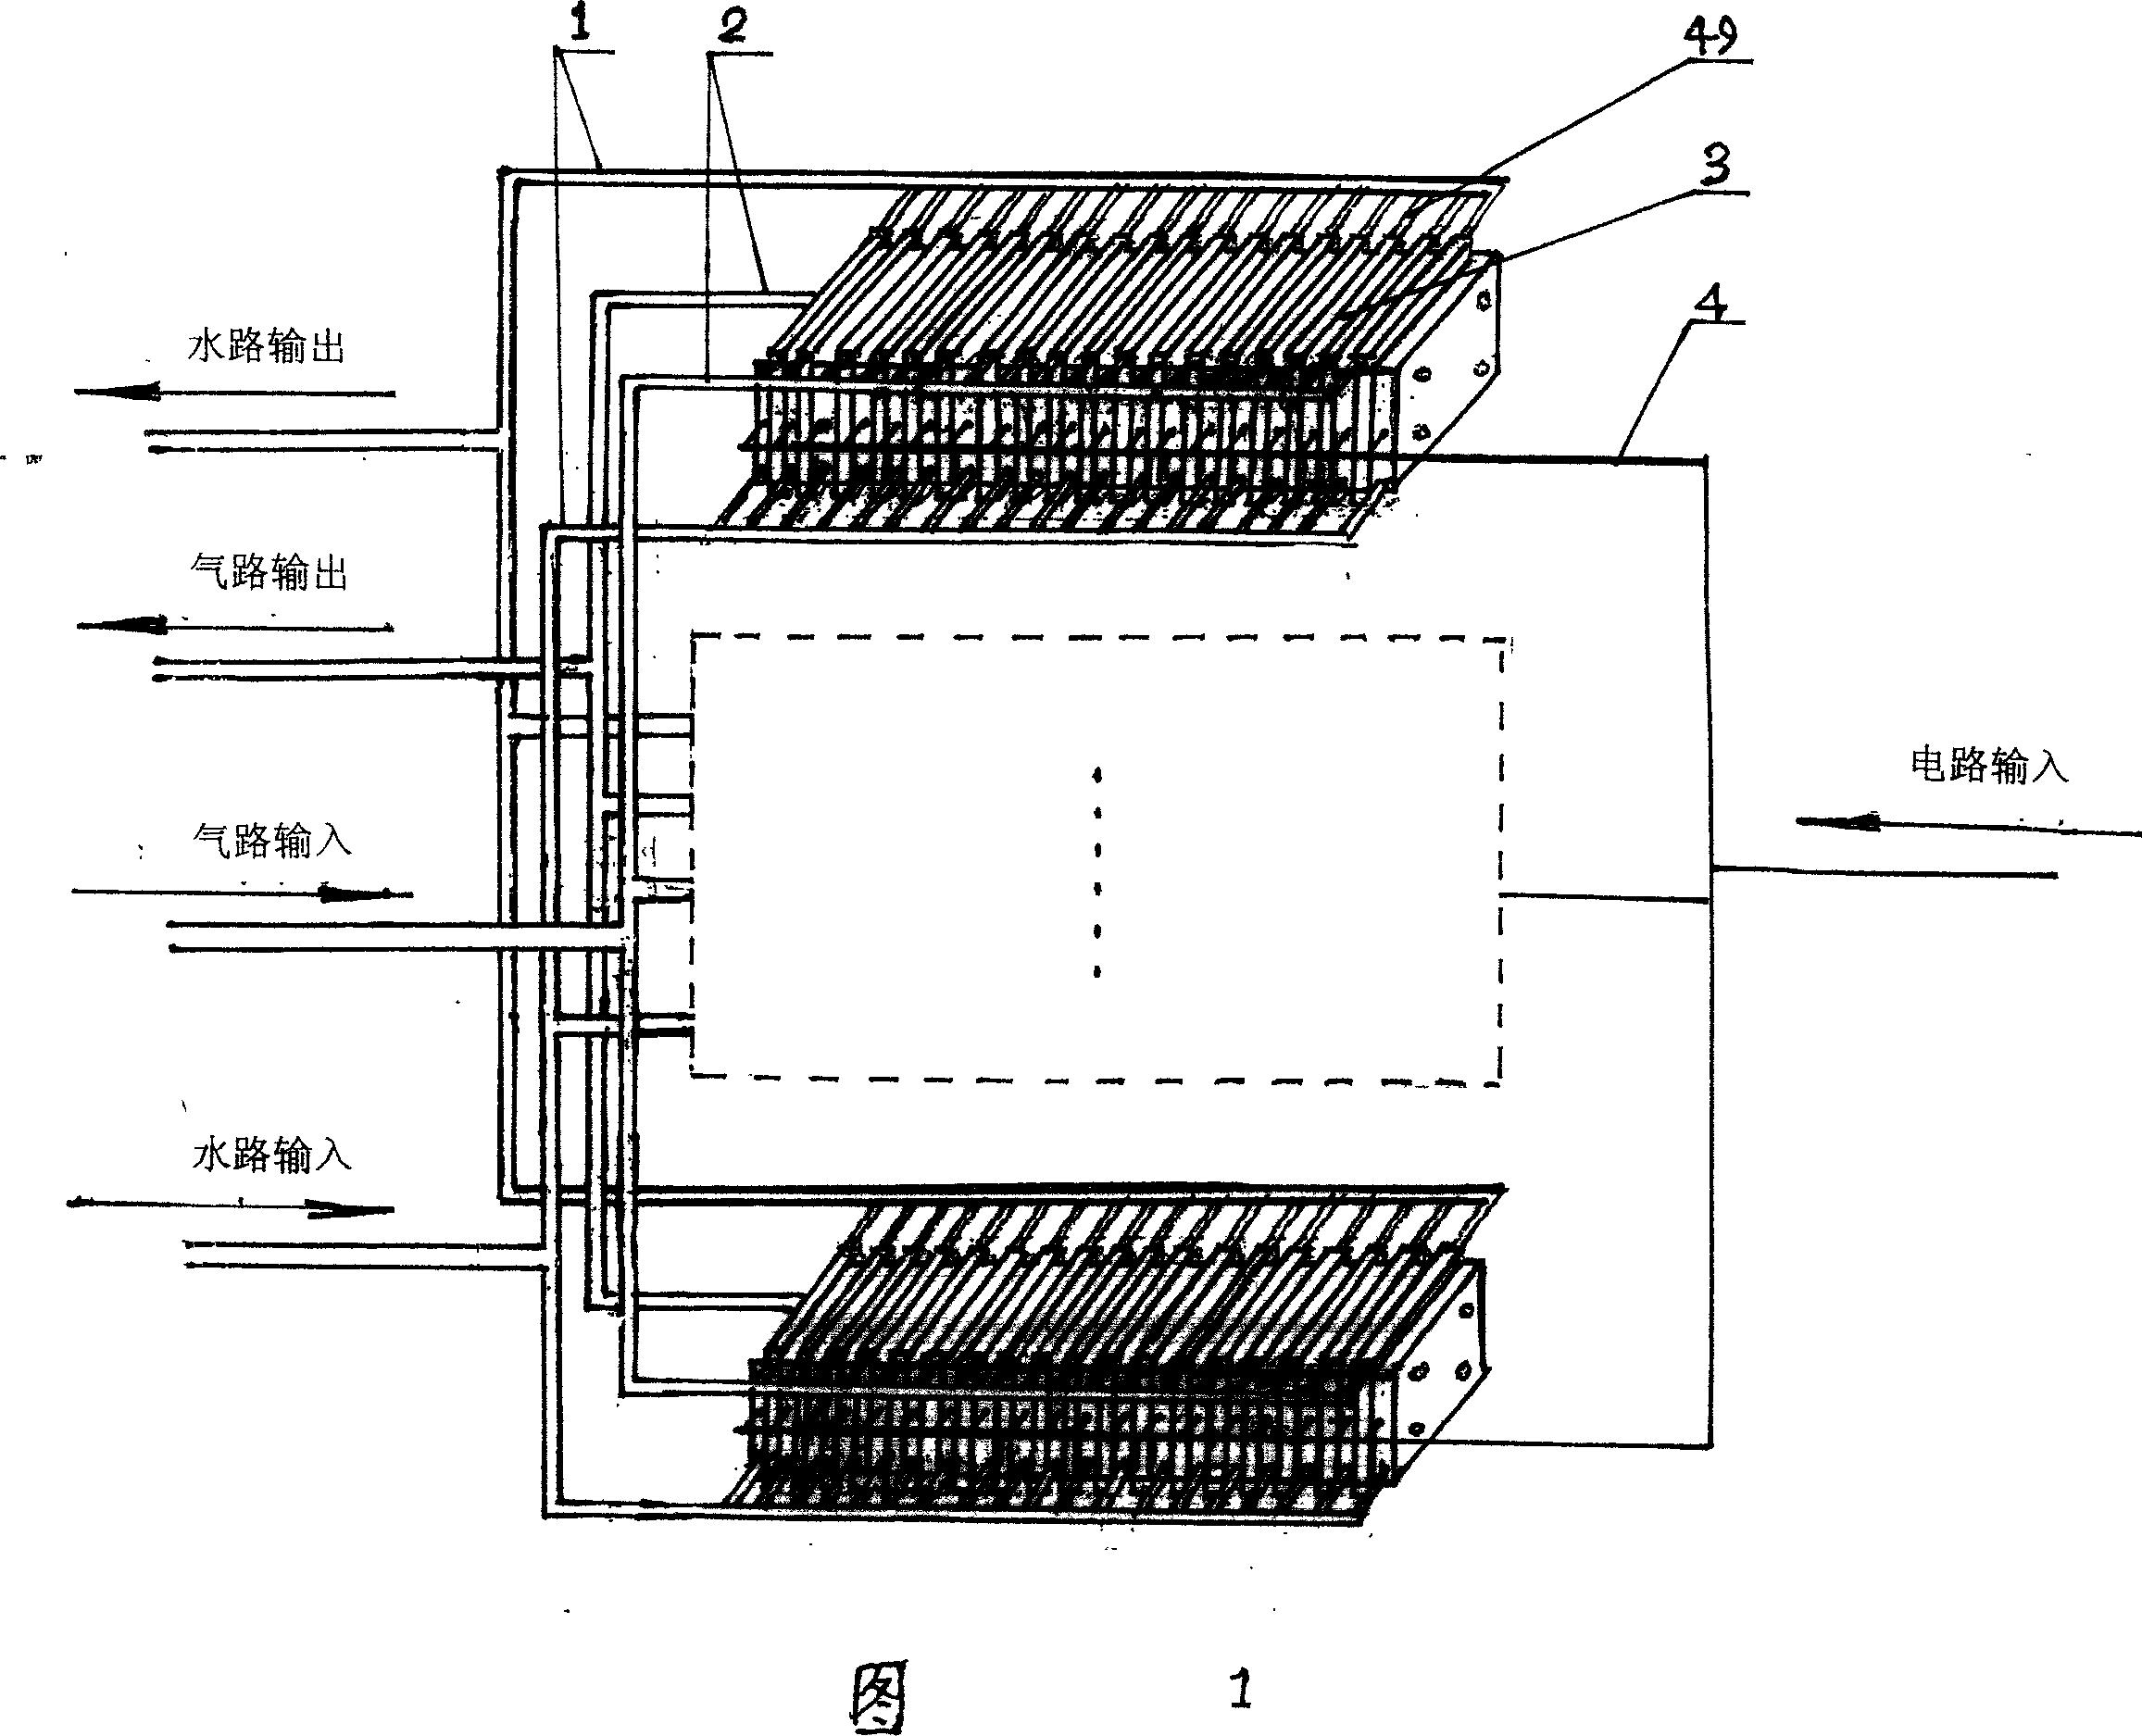 Composition board type high-frequency large-scale ozone generator